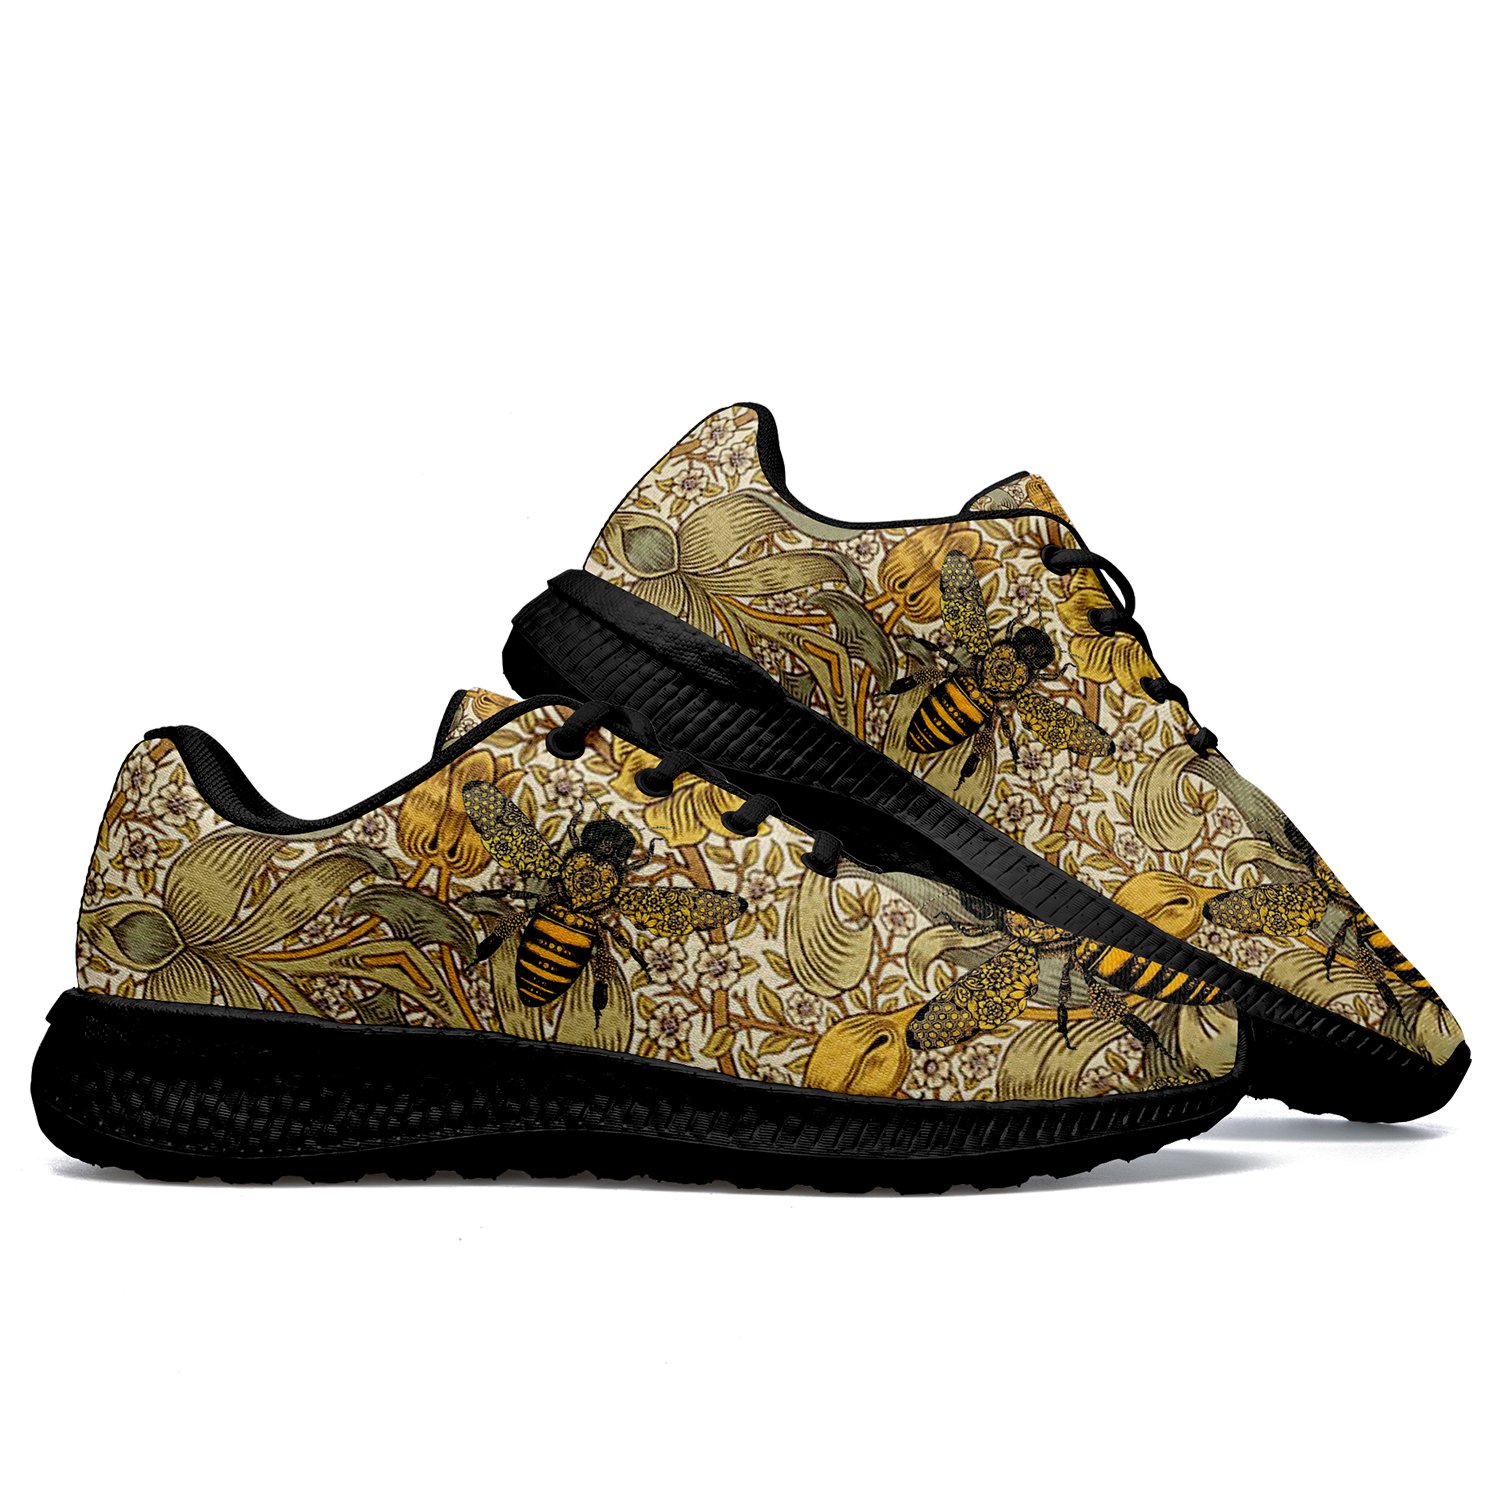 Custom Bee Printed Sneaker Buy One Get One Free $79 (~A$110) + Delivery $6  @Toponepod